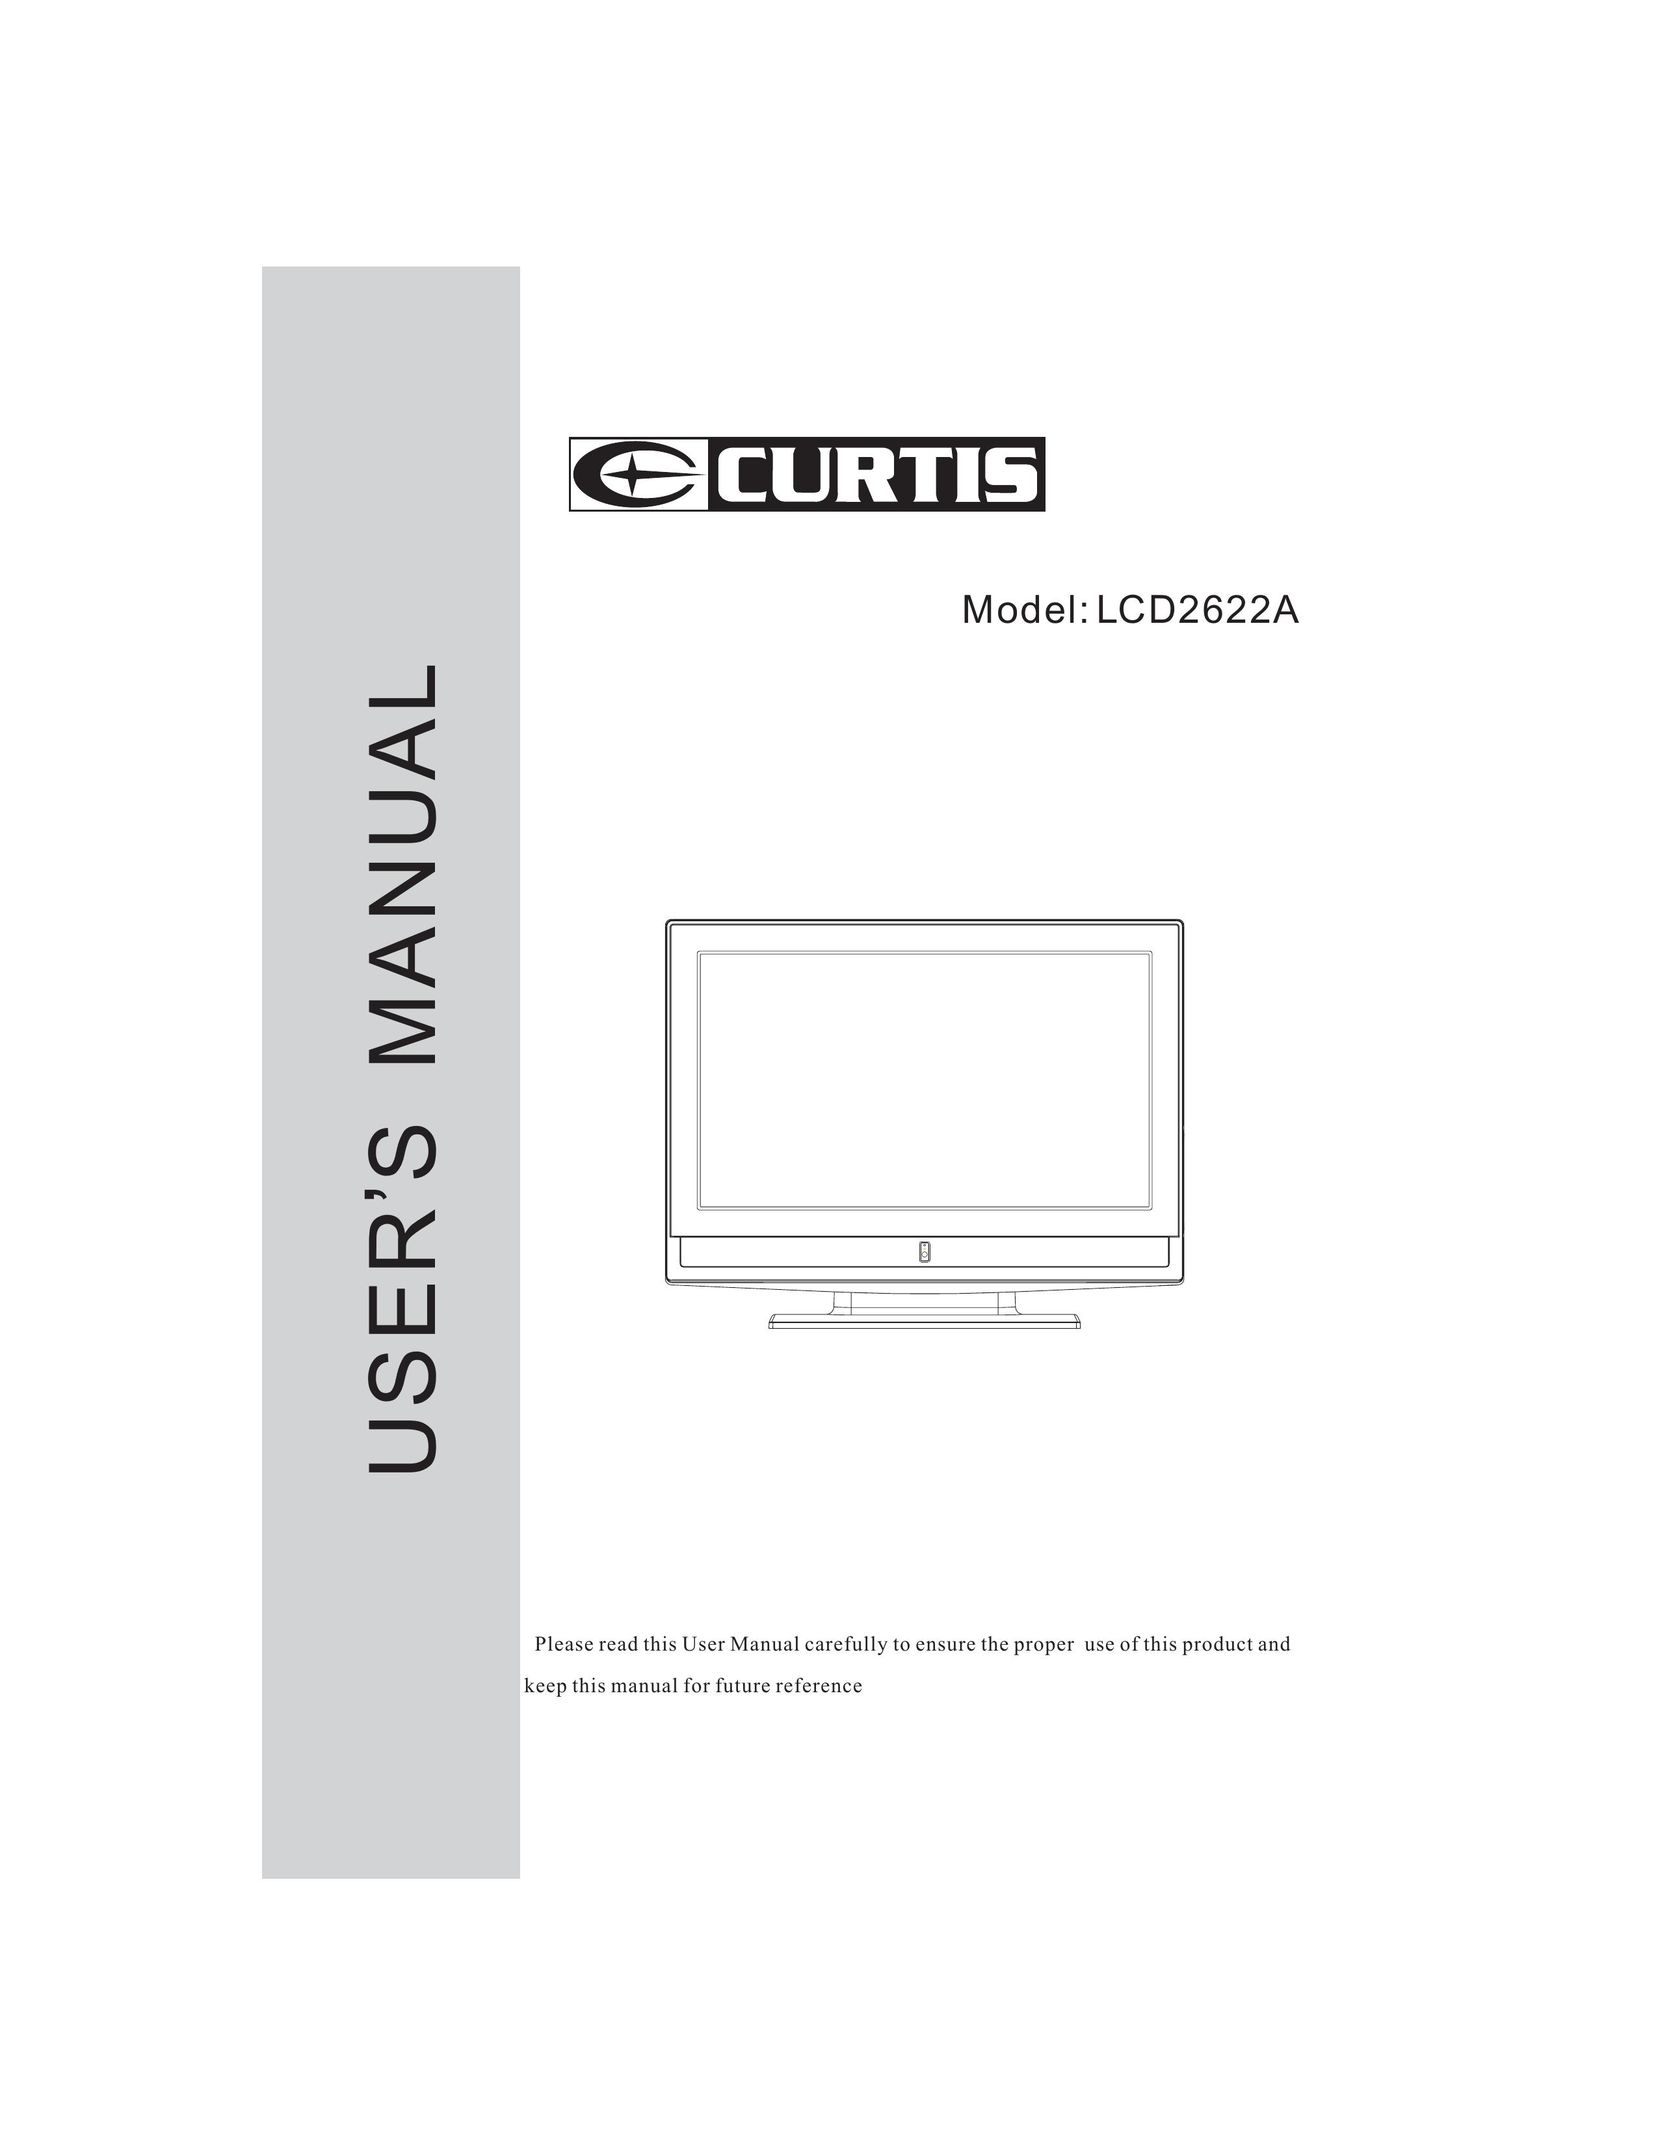 Curtis LCD2622A Flat Panel Television User Manual